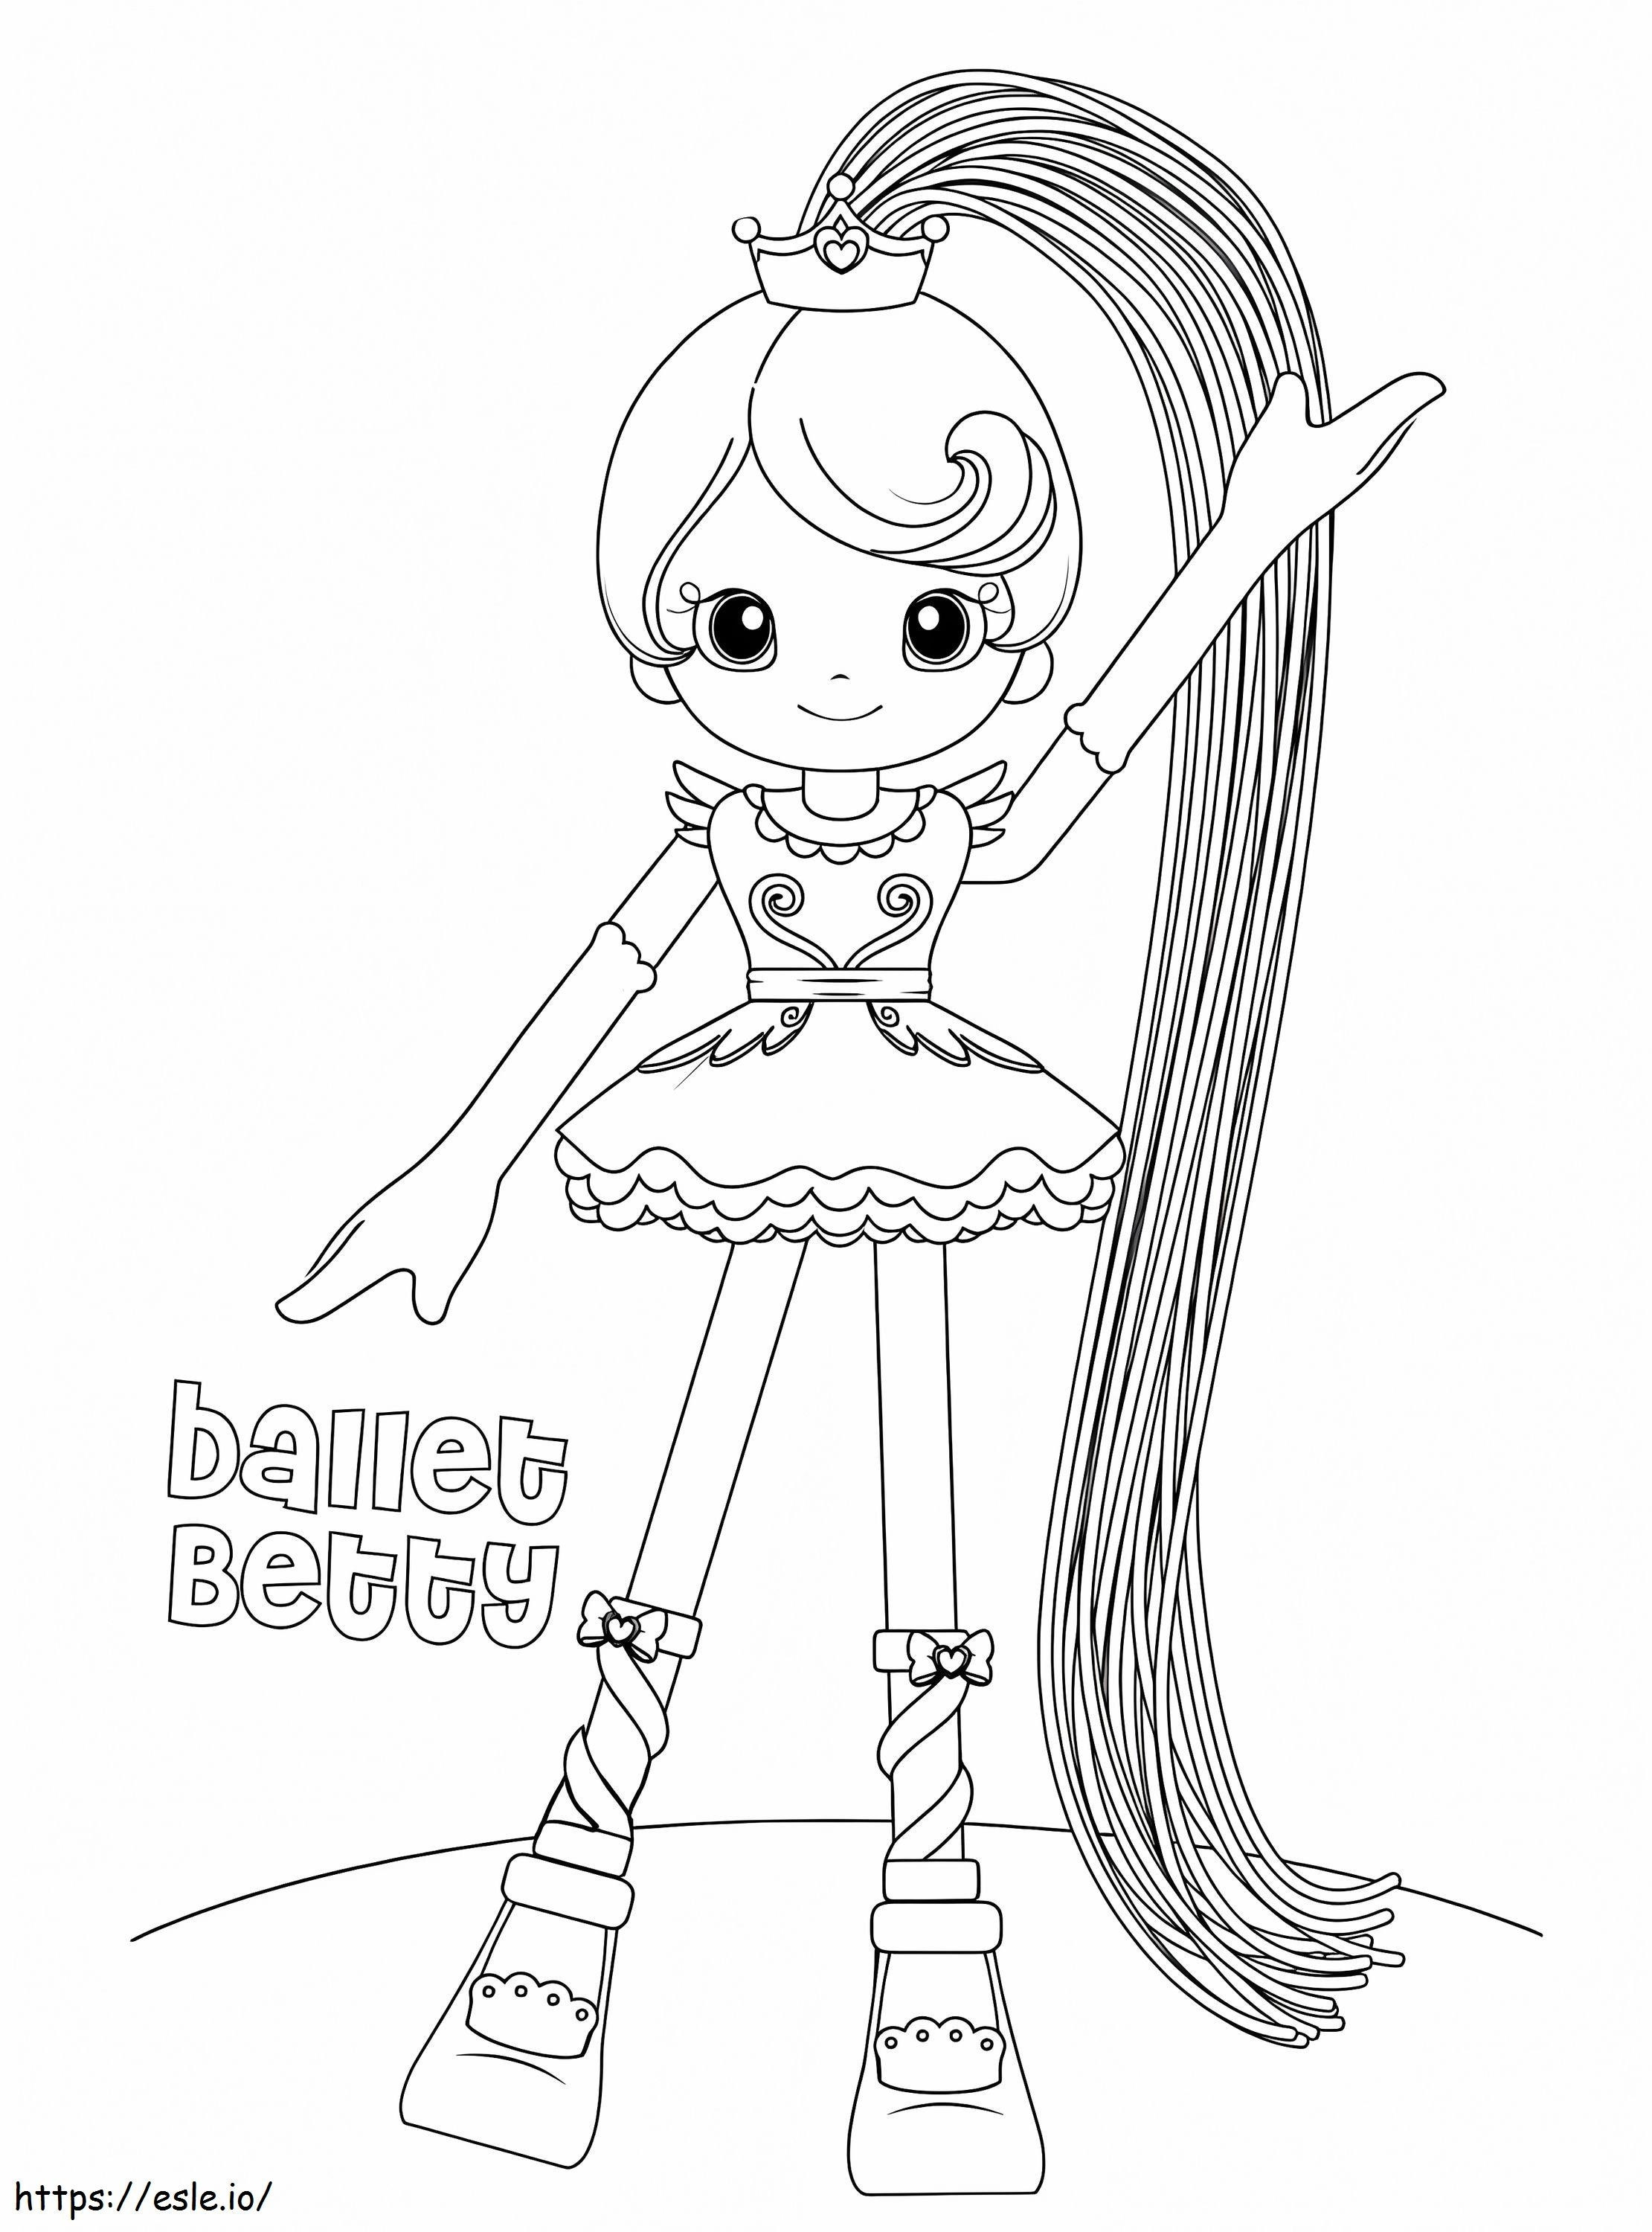 Ballet Betty coloring page